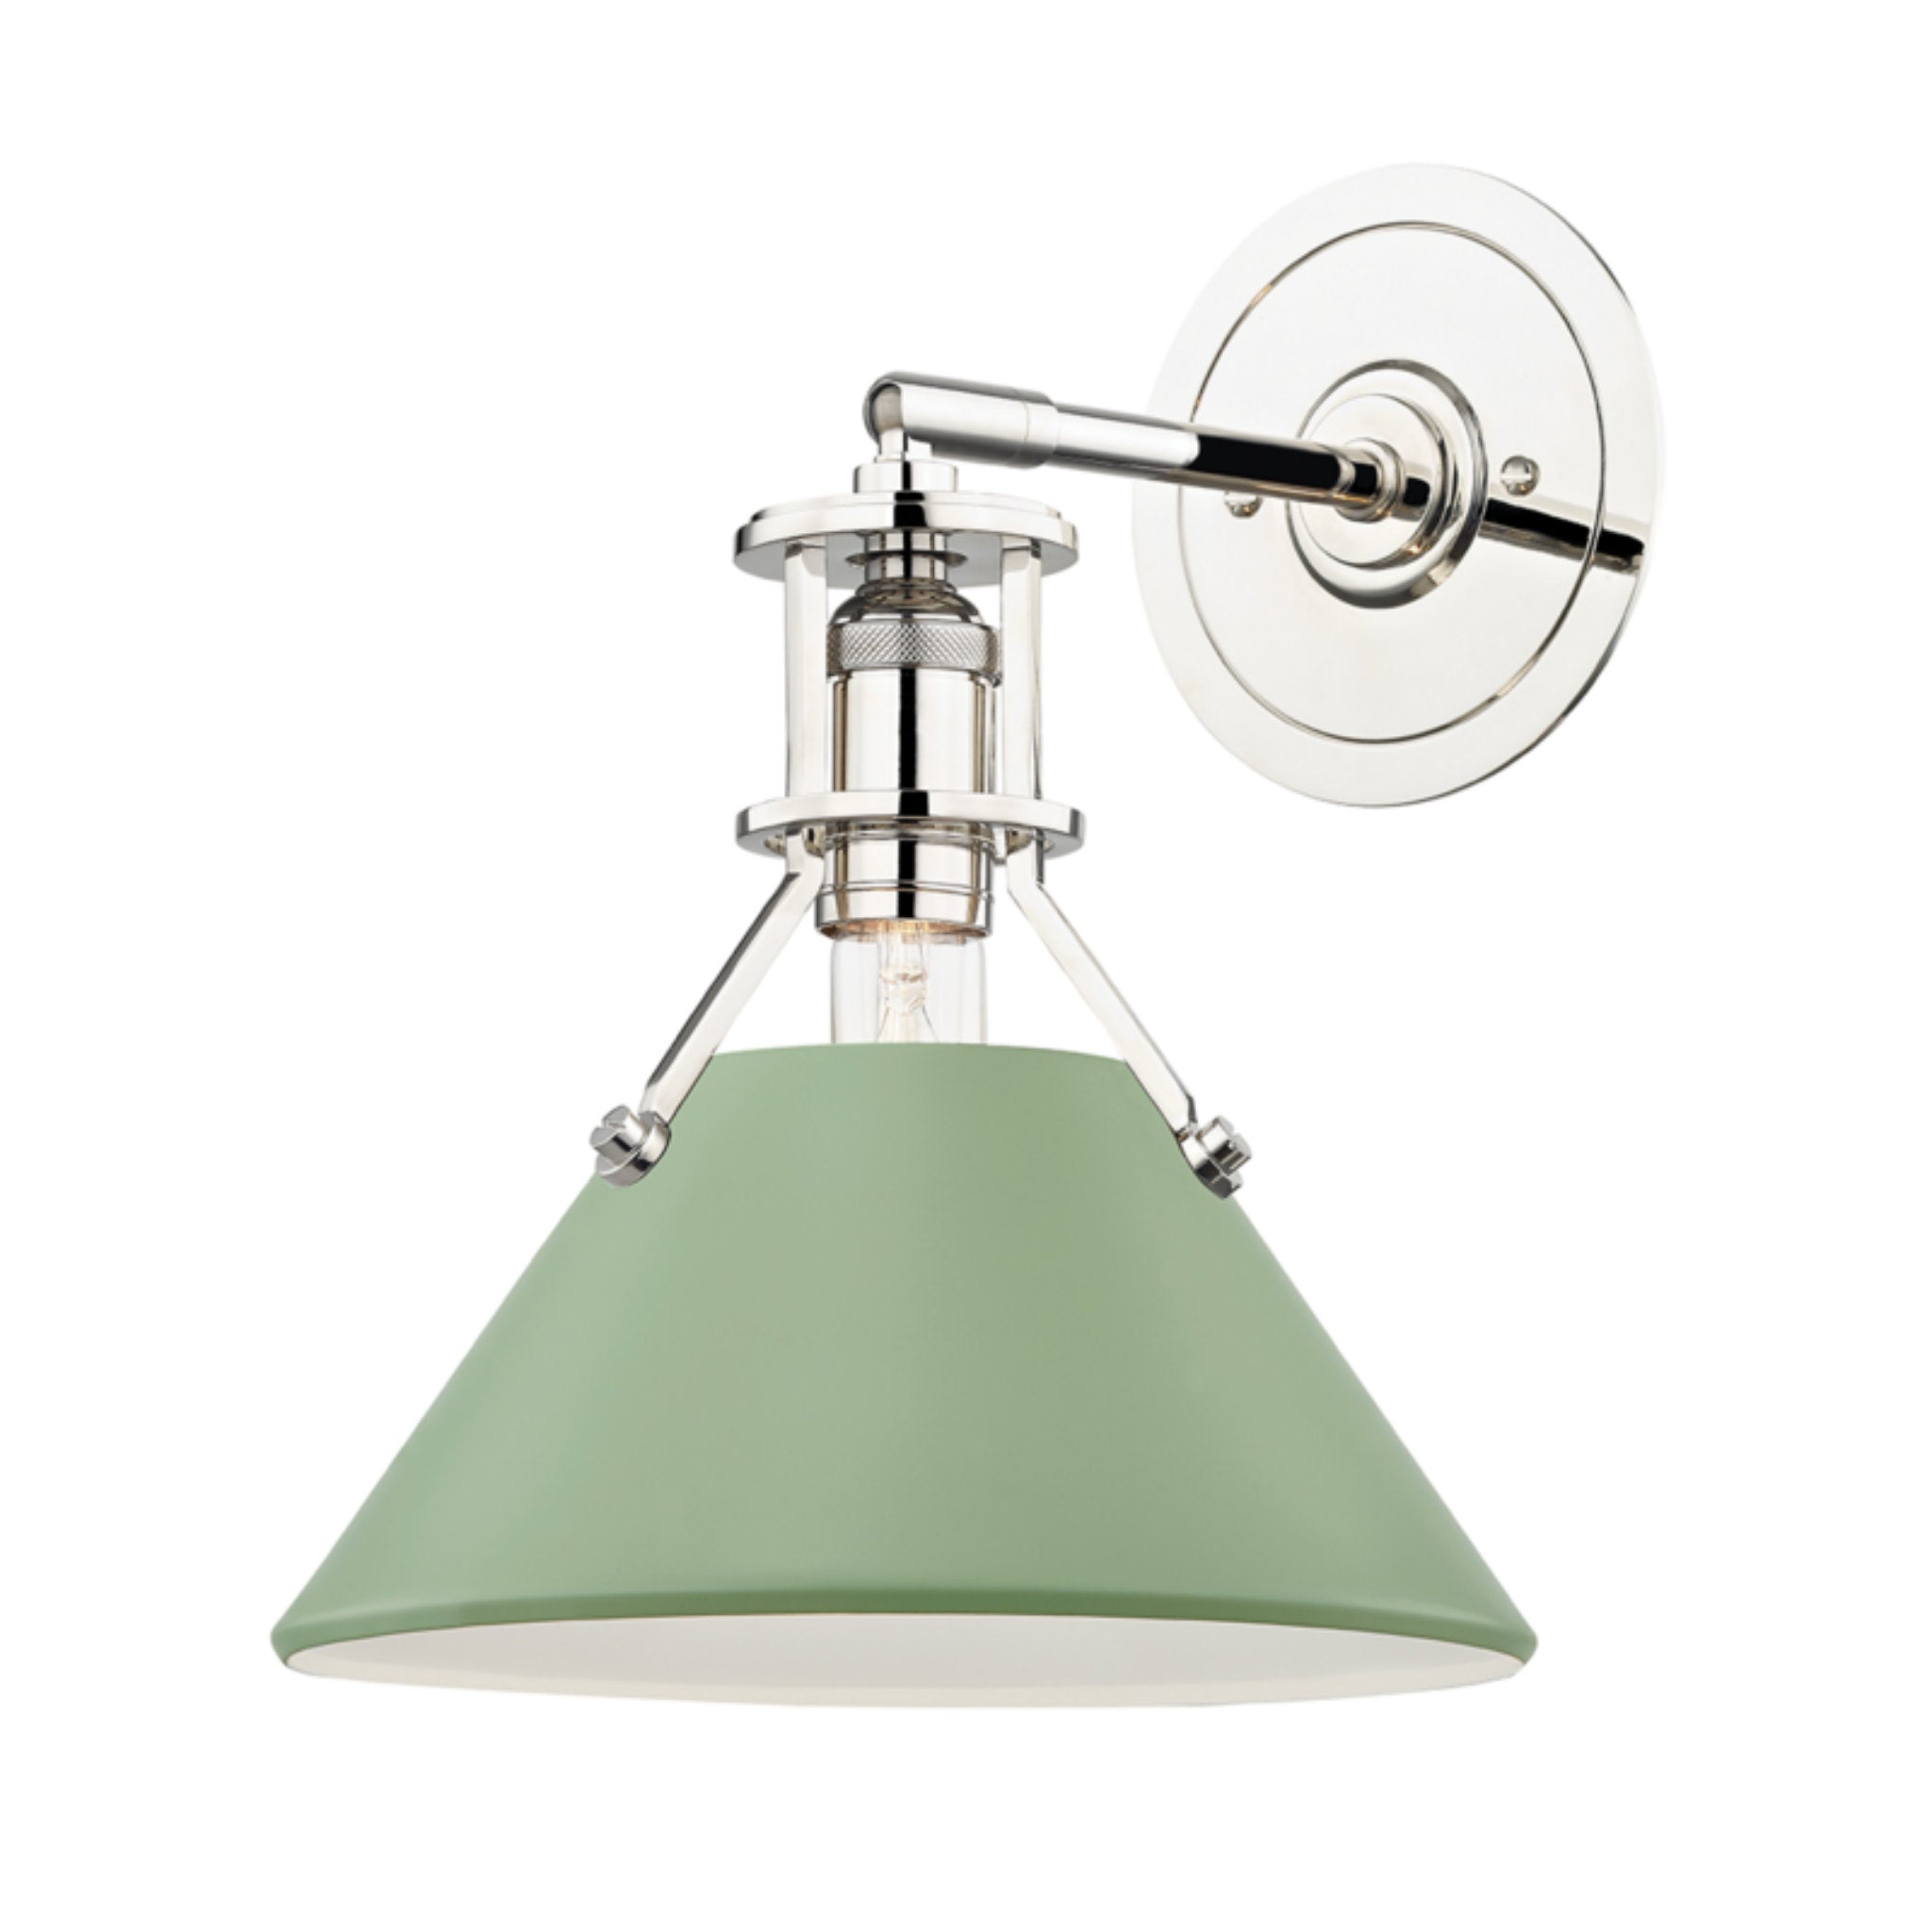 Painted No.2 1 Light Wall Sconce in Polished Nickel/leaf Green by Mark D. Sikes